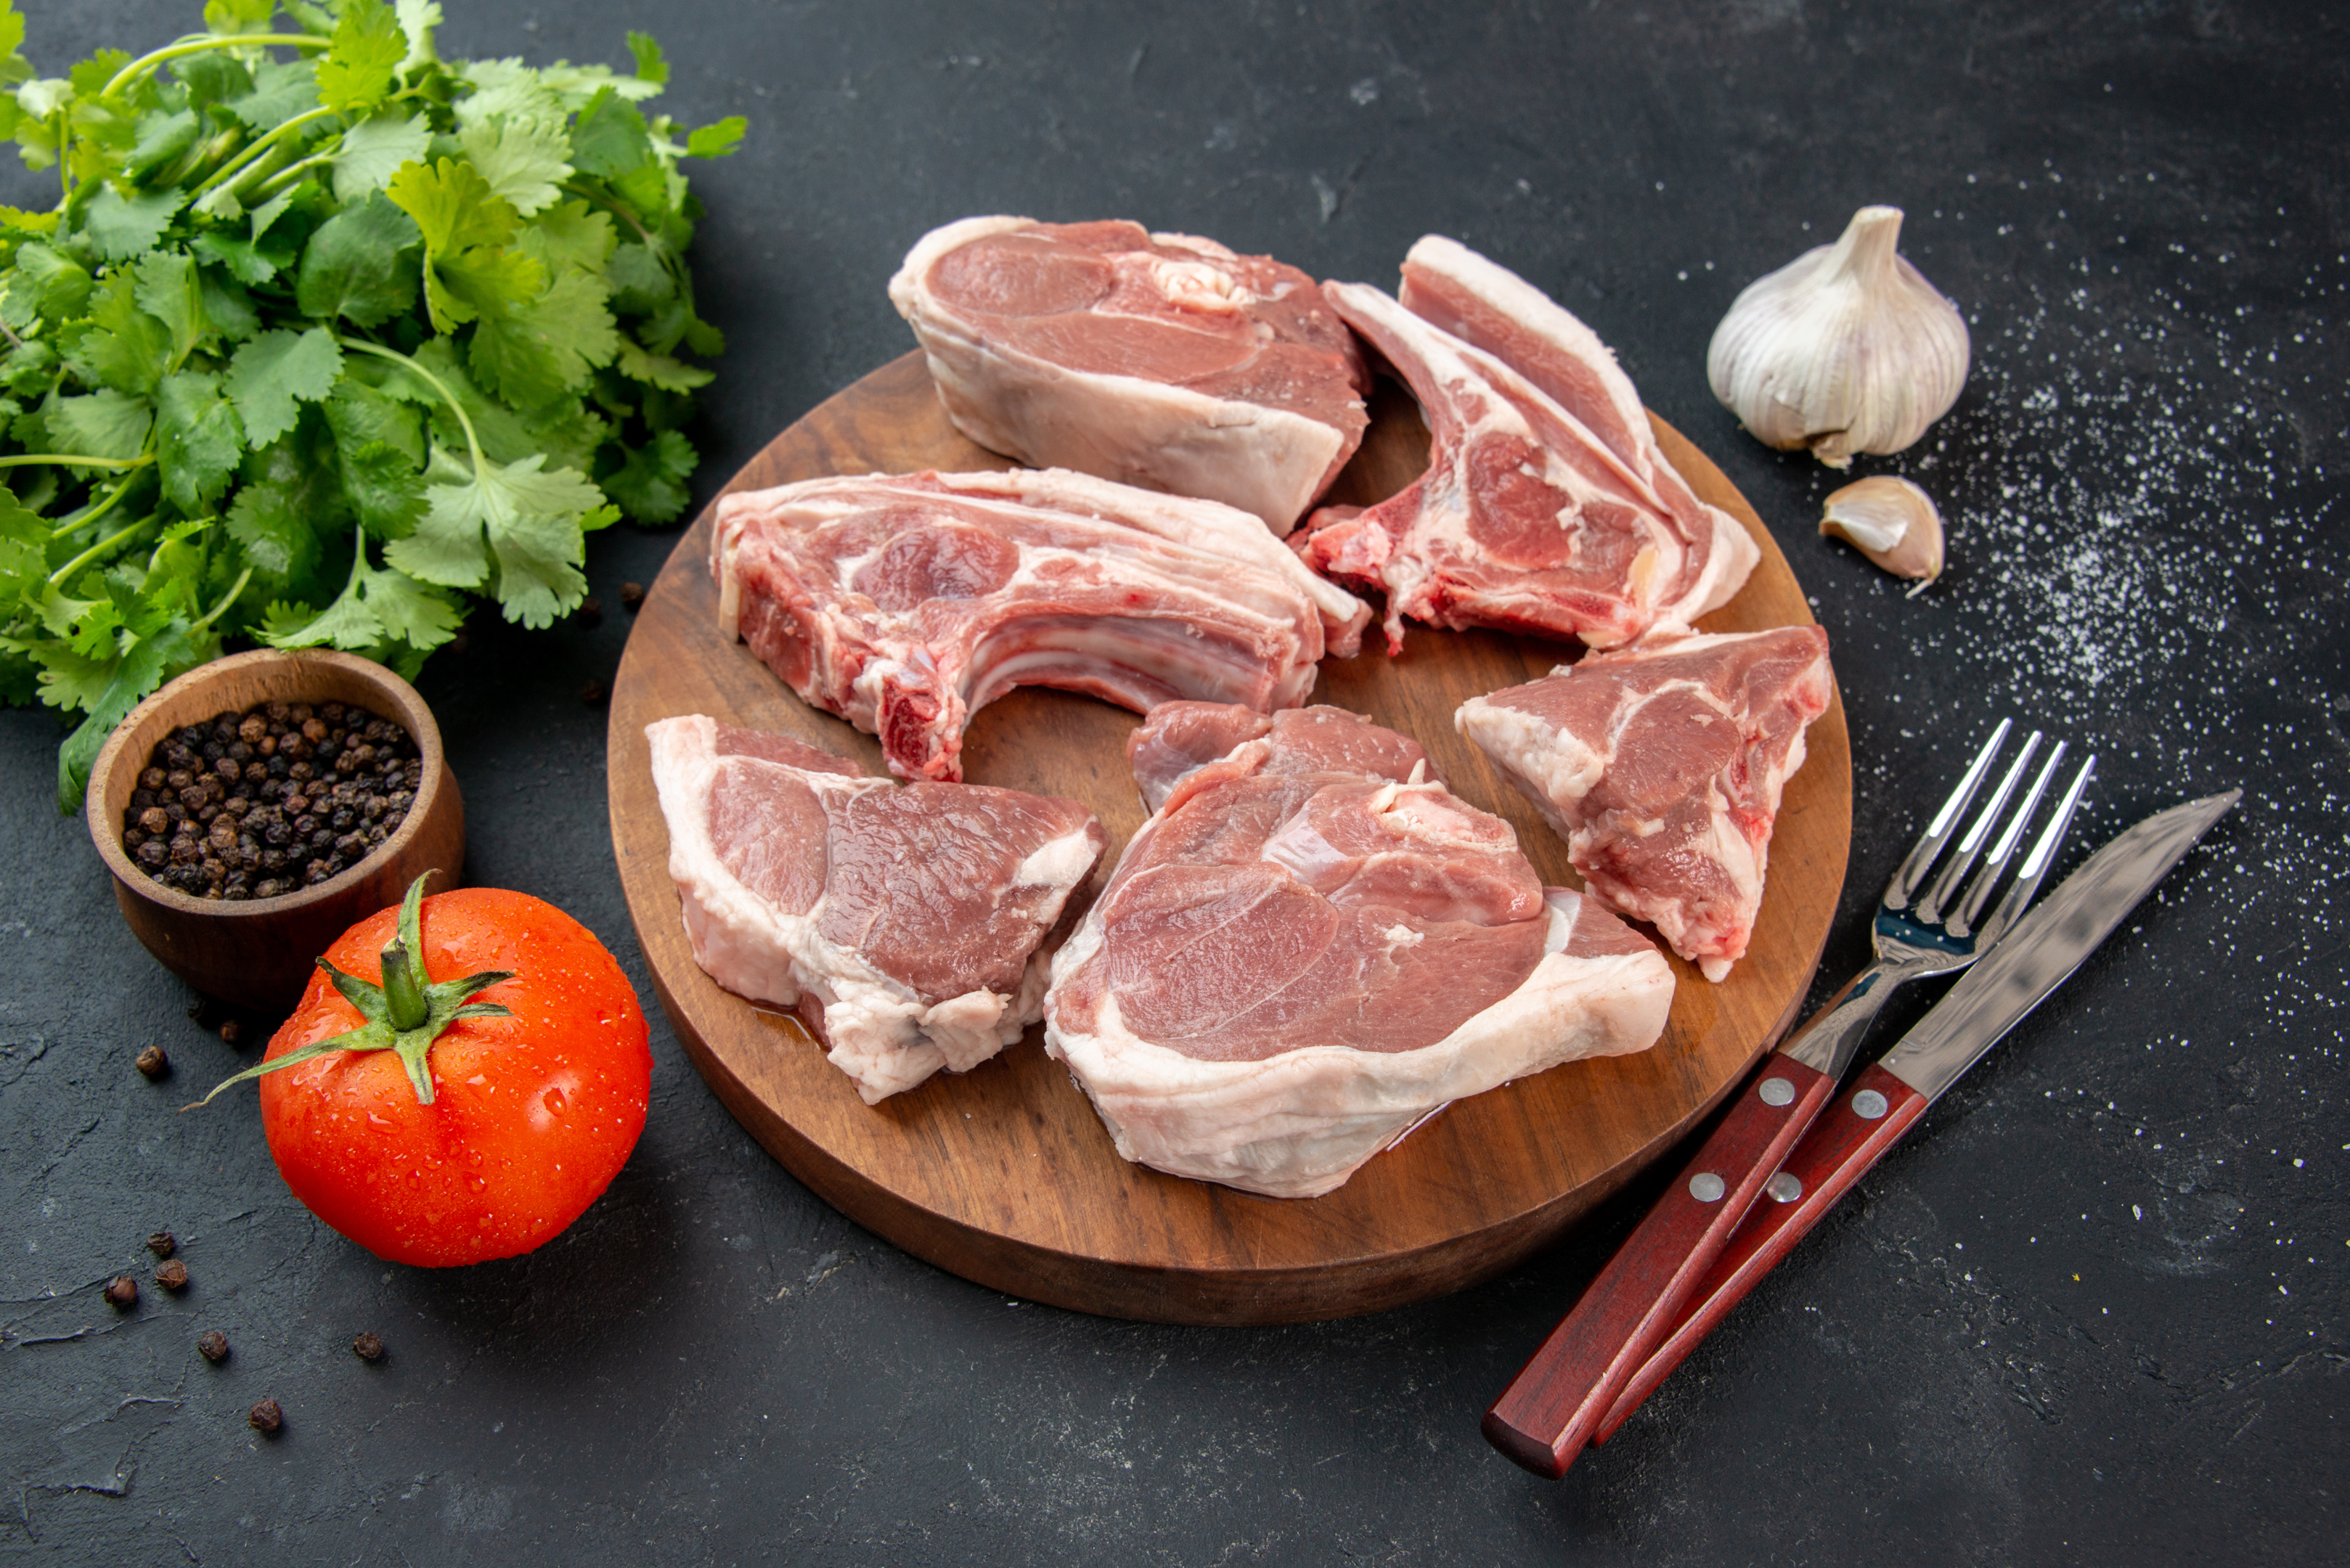 Pork shoulder, pork belly, pork loin, pork ribs and even leftover cooked pork can be used in curry recipes.